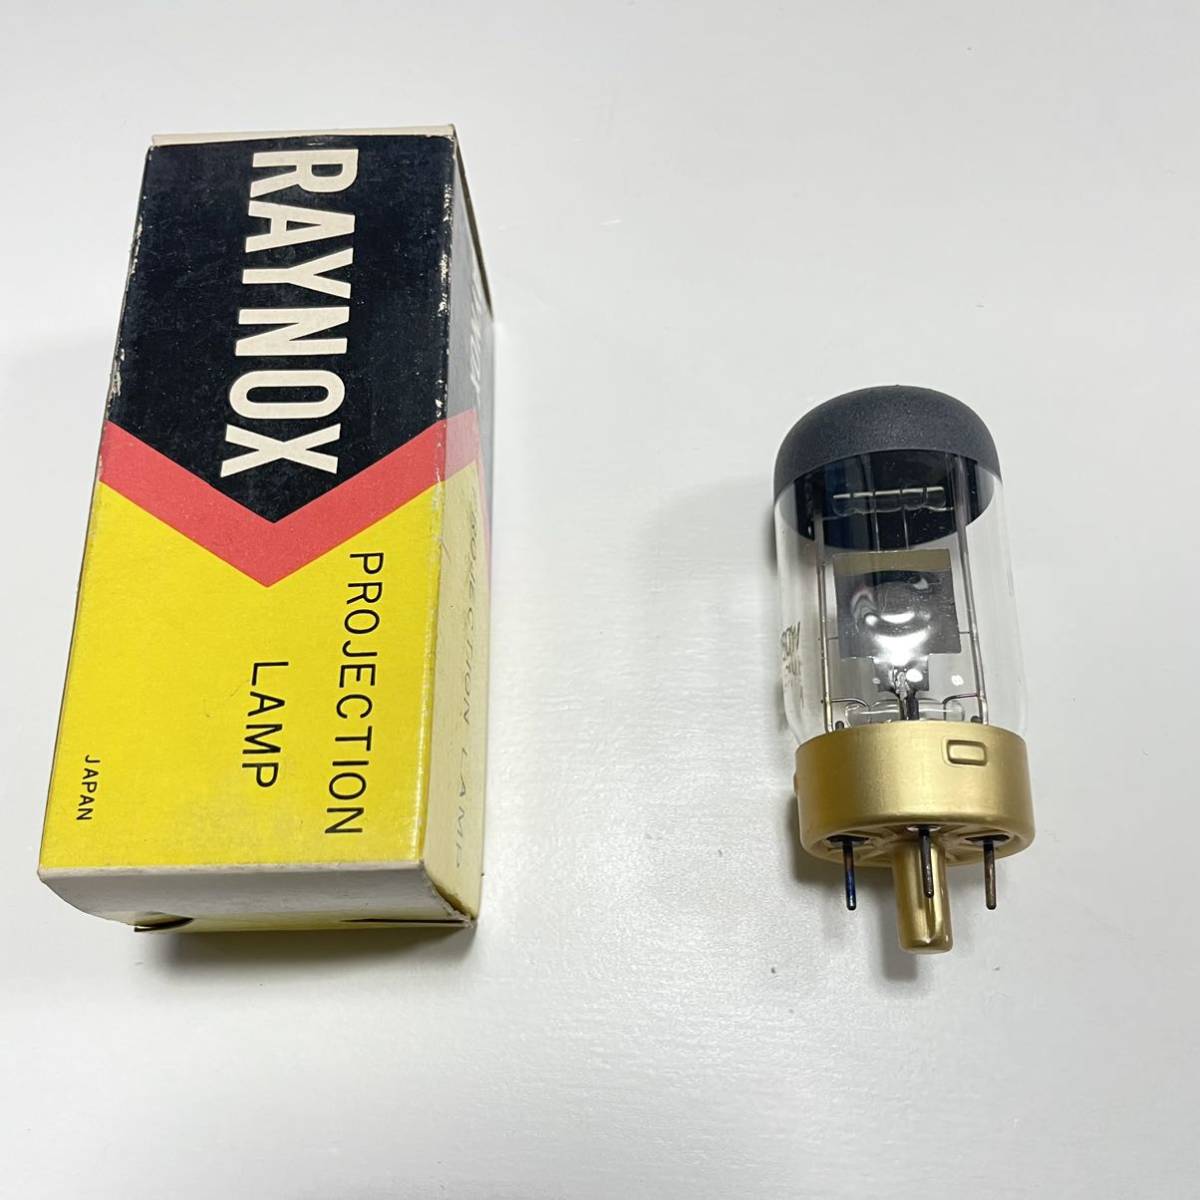 RAYNOX Projection Lamp FOR 8mm MOVIE PROJECTOR 100V 150W 映写機ランプ ⑤_画像3